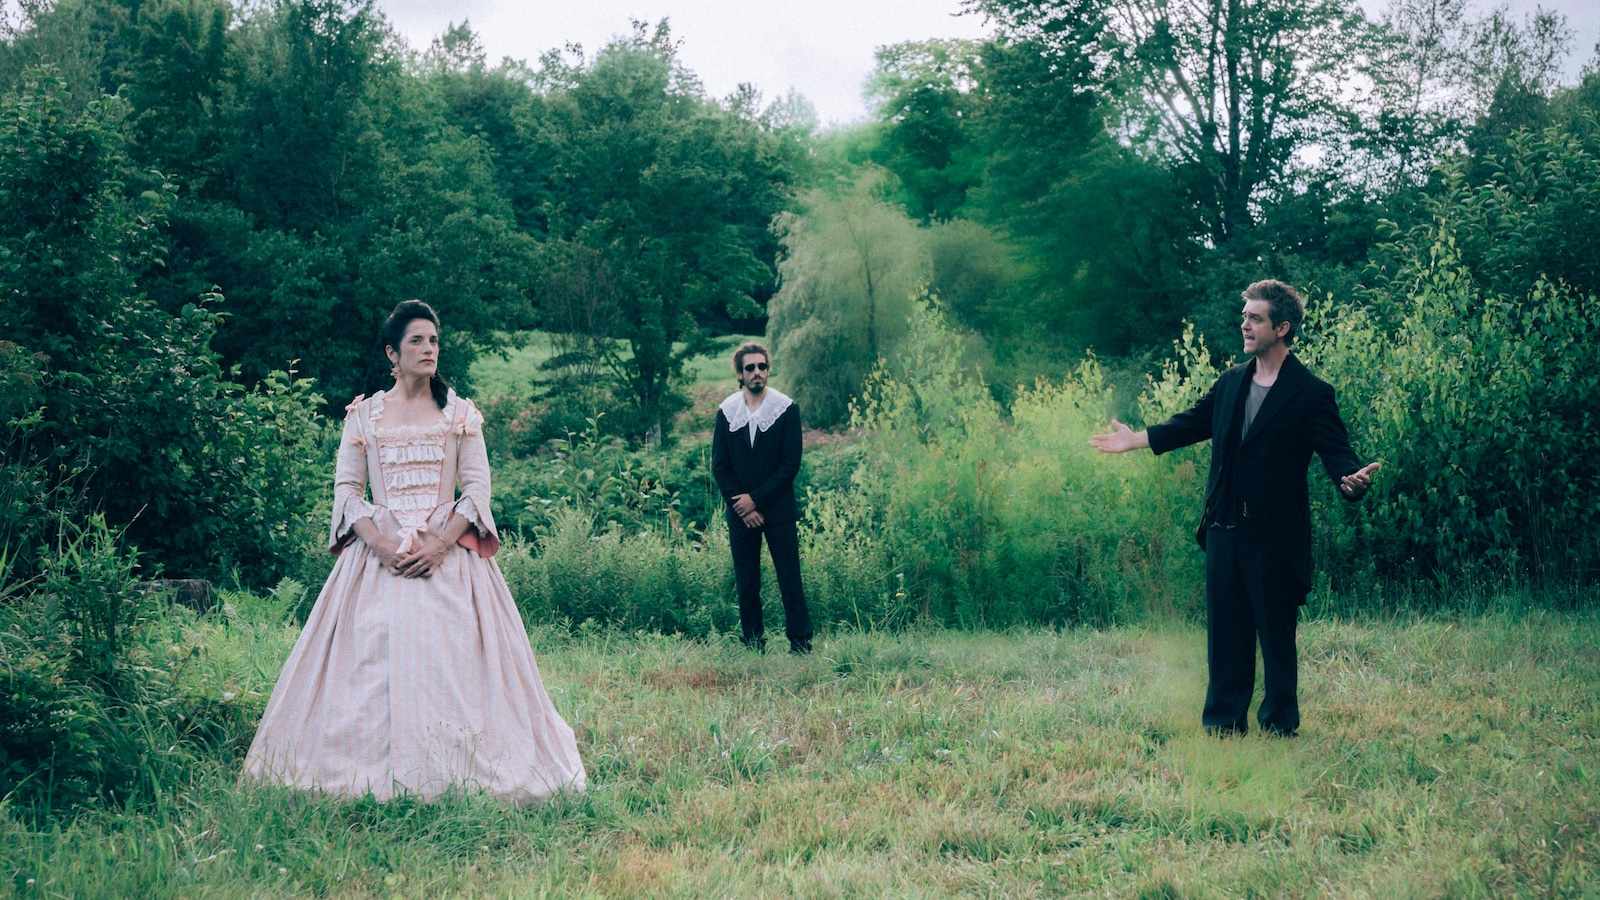 In a field, two men and a woman (Eve Dorso) in old dress.